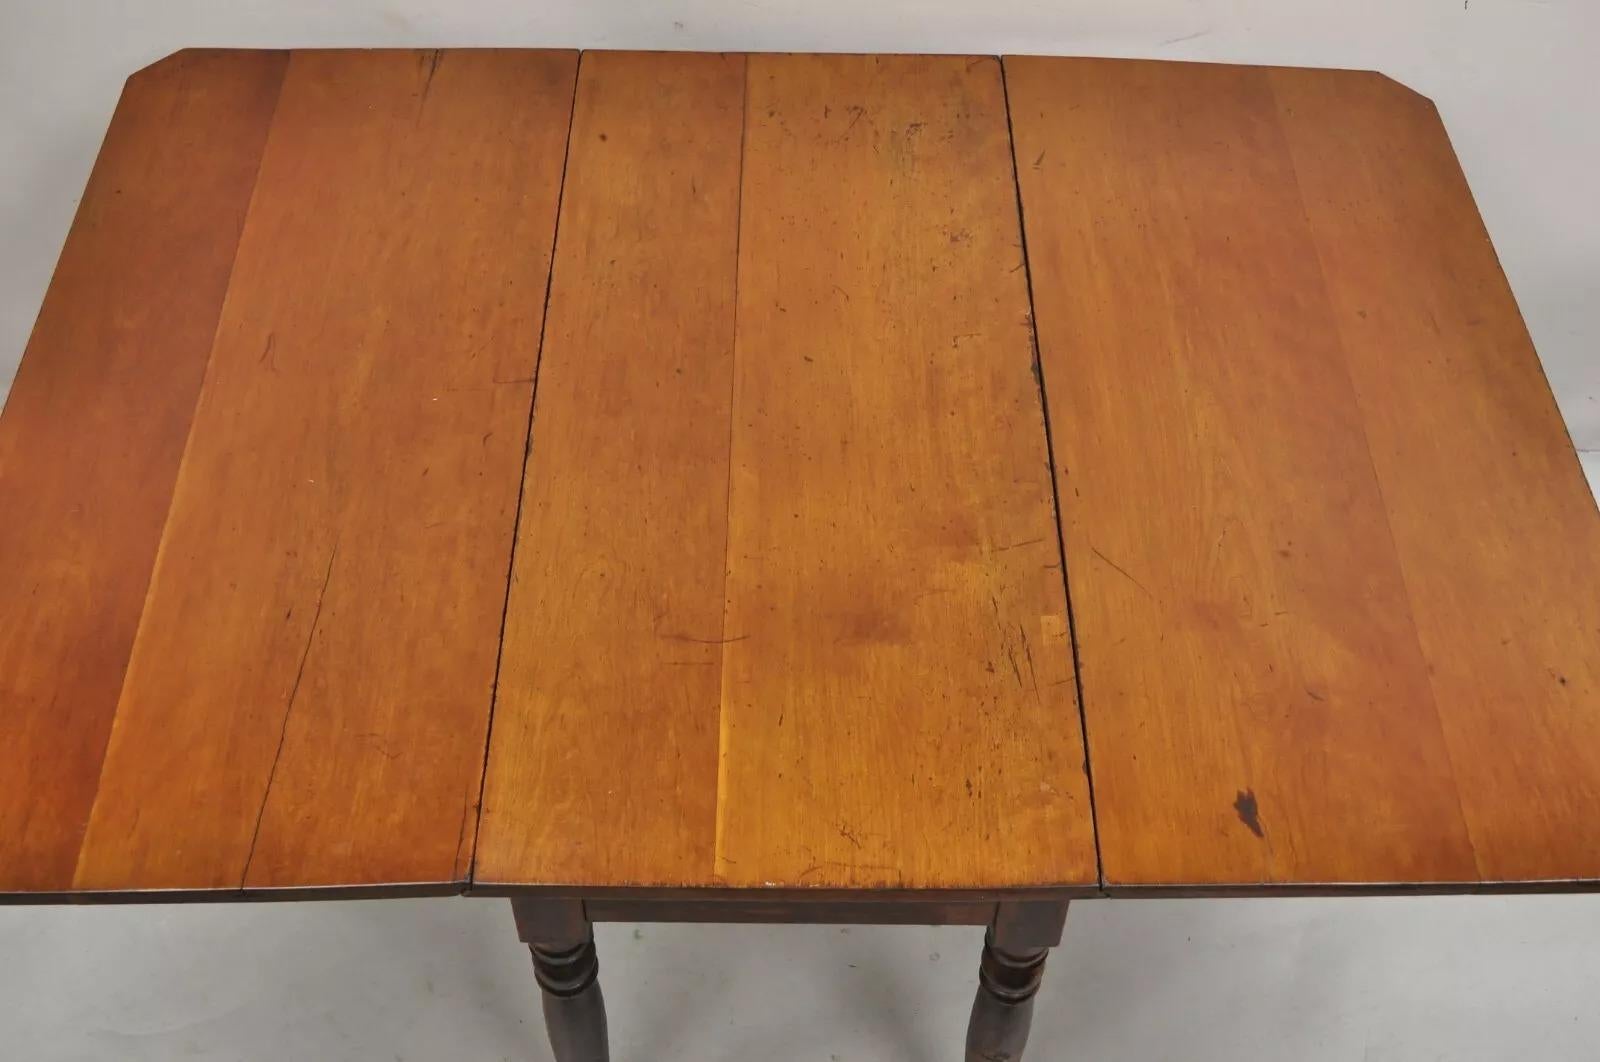 Antique American Colonial Cherry Wood Gateleg Drop Leaf Farmhouse Dining Table For Sale 3